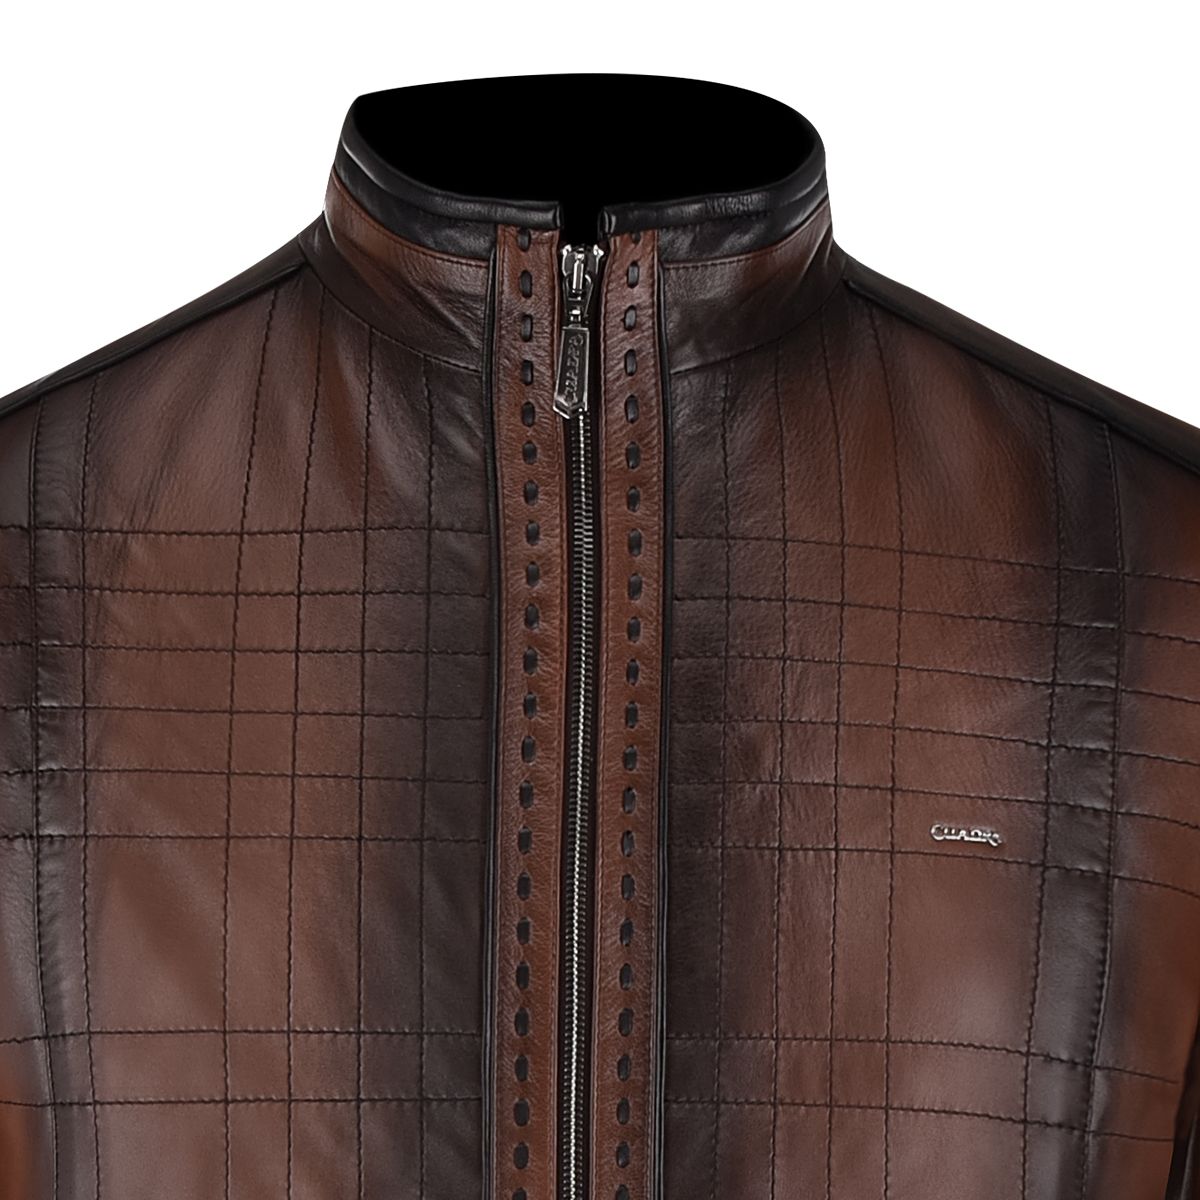 H293COB - Cuadra brown casual fashion quilted sheepskin leather jacket for men-Kuet.us - Cuadra Boots - Western Cowboy, Casual Fashion and Dress Boots